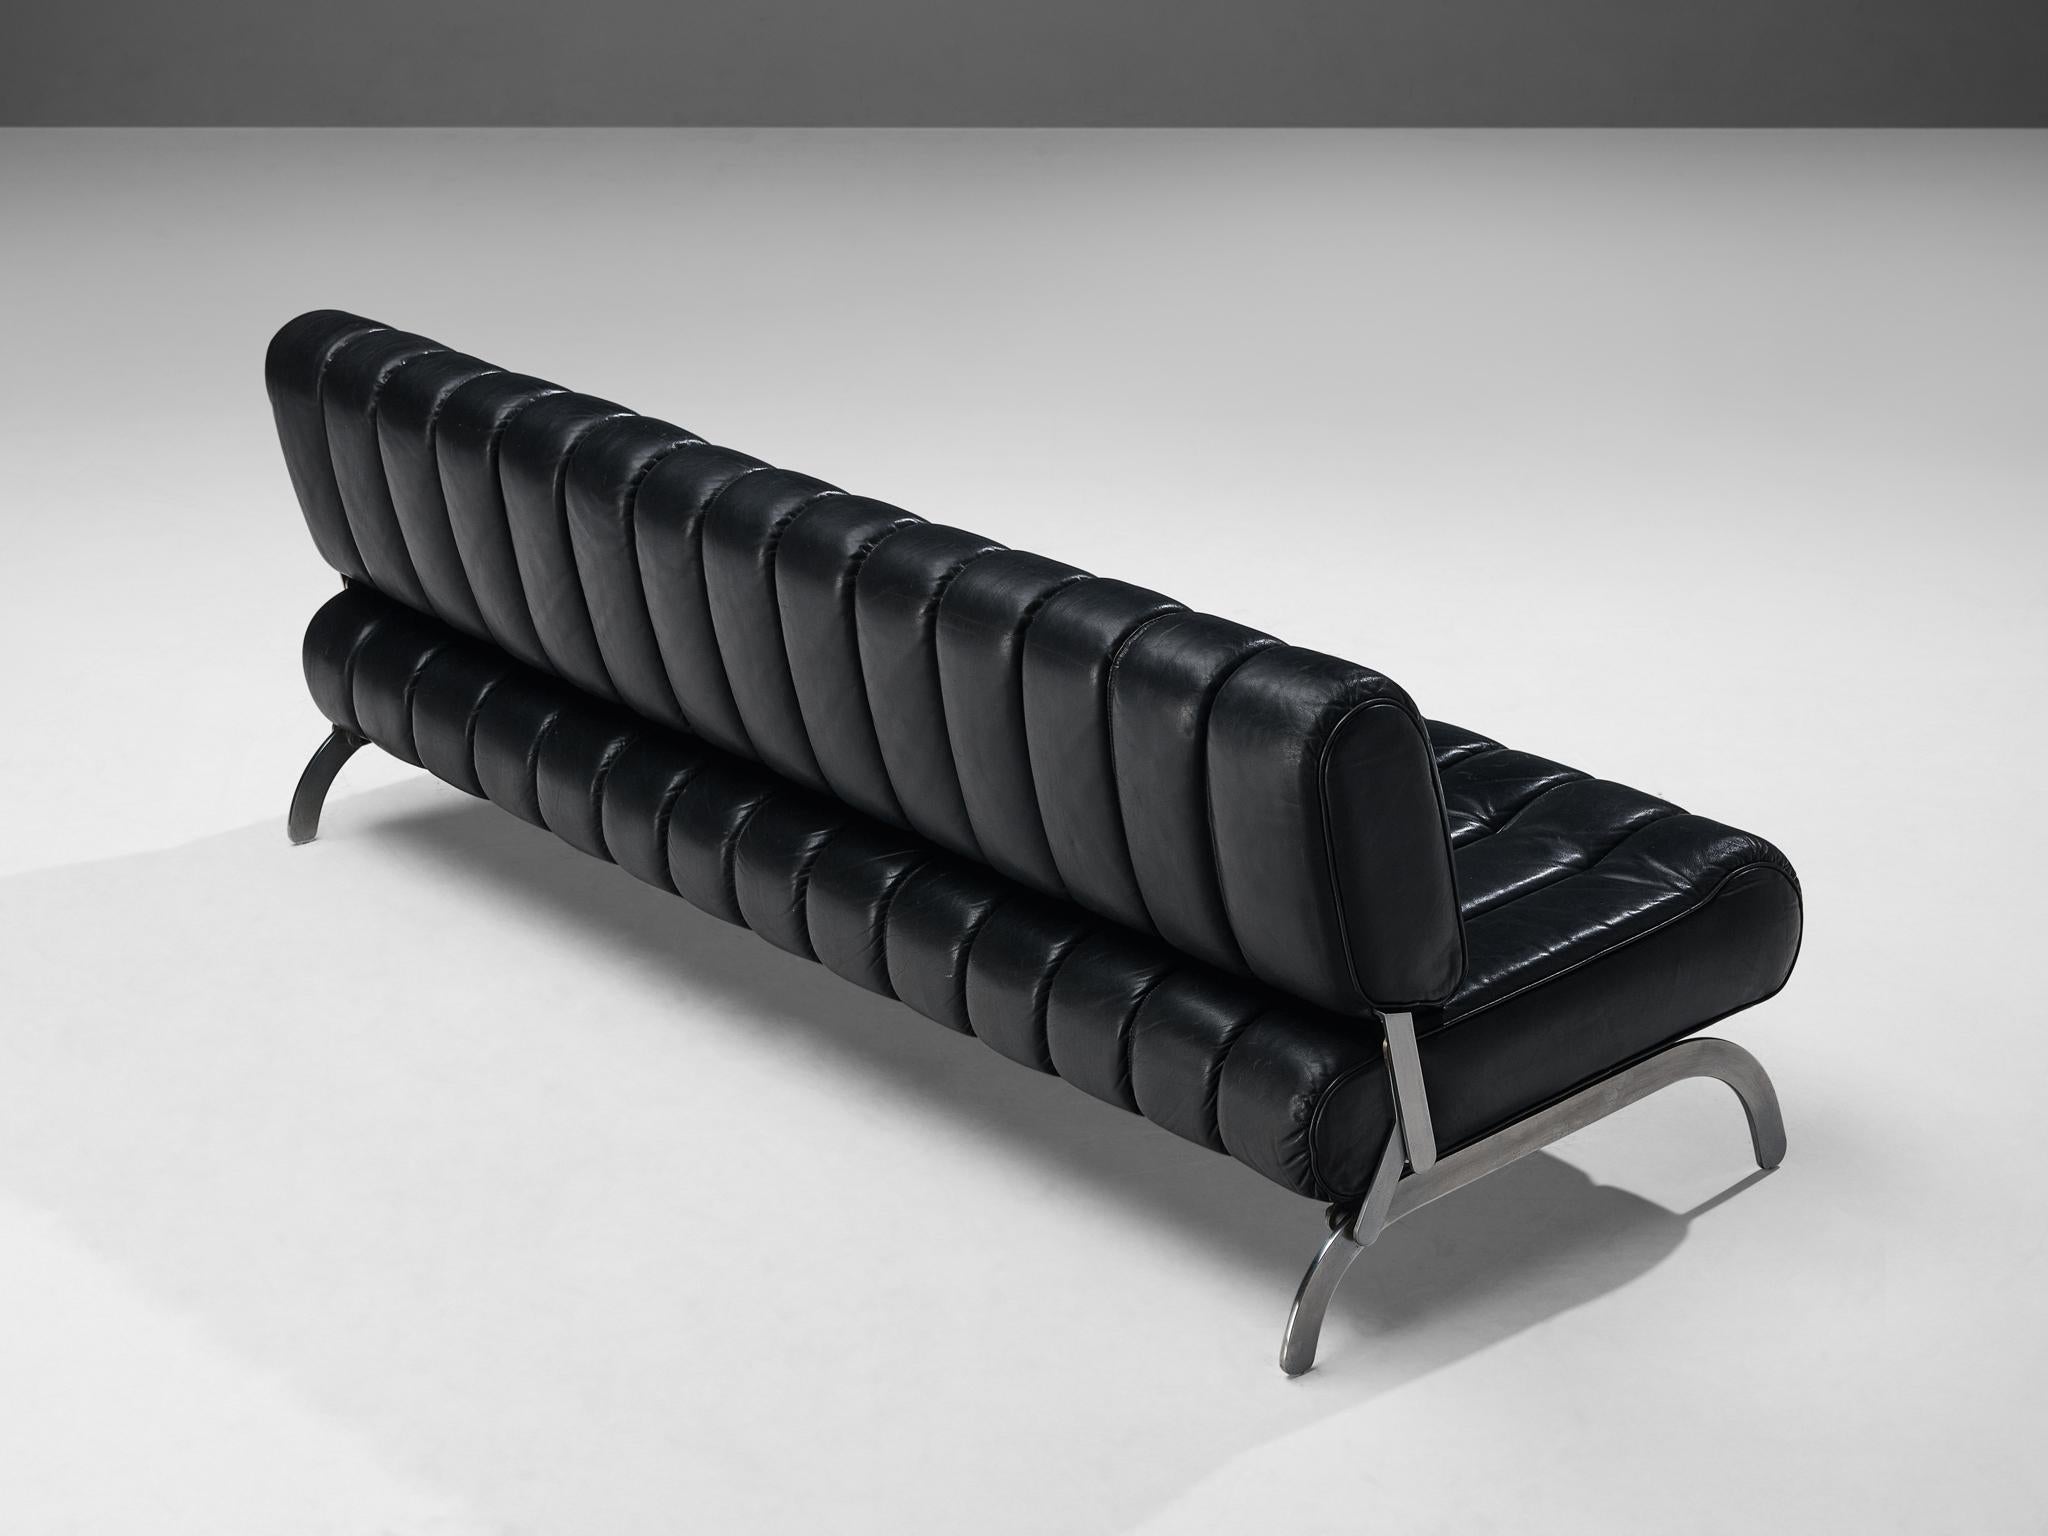 Karl Wittmann sofa or daybed 'Independence', leather, steel, Austria, circa 1963

Karl Wittmann designed this lovely sofa which can be changed easily into a daybed by one easy action. This sofa consists out of two parts, the backrest and the